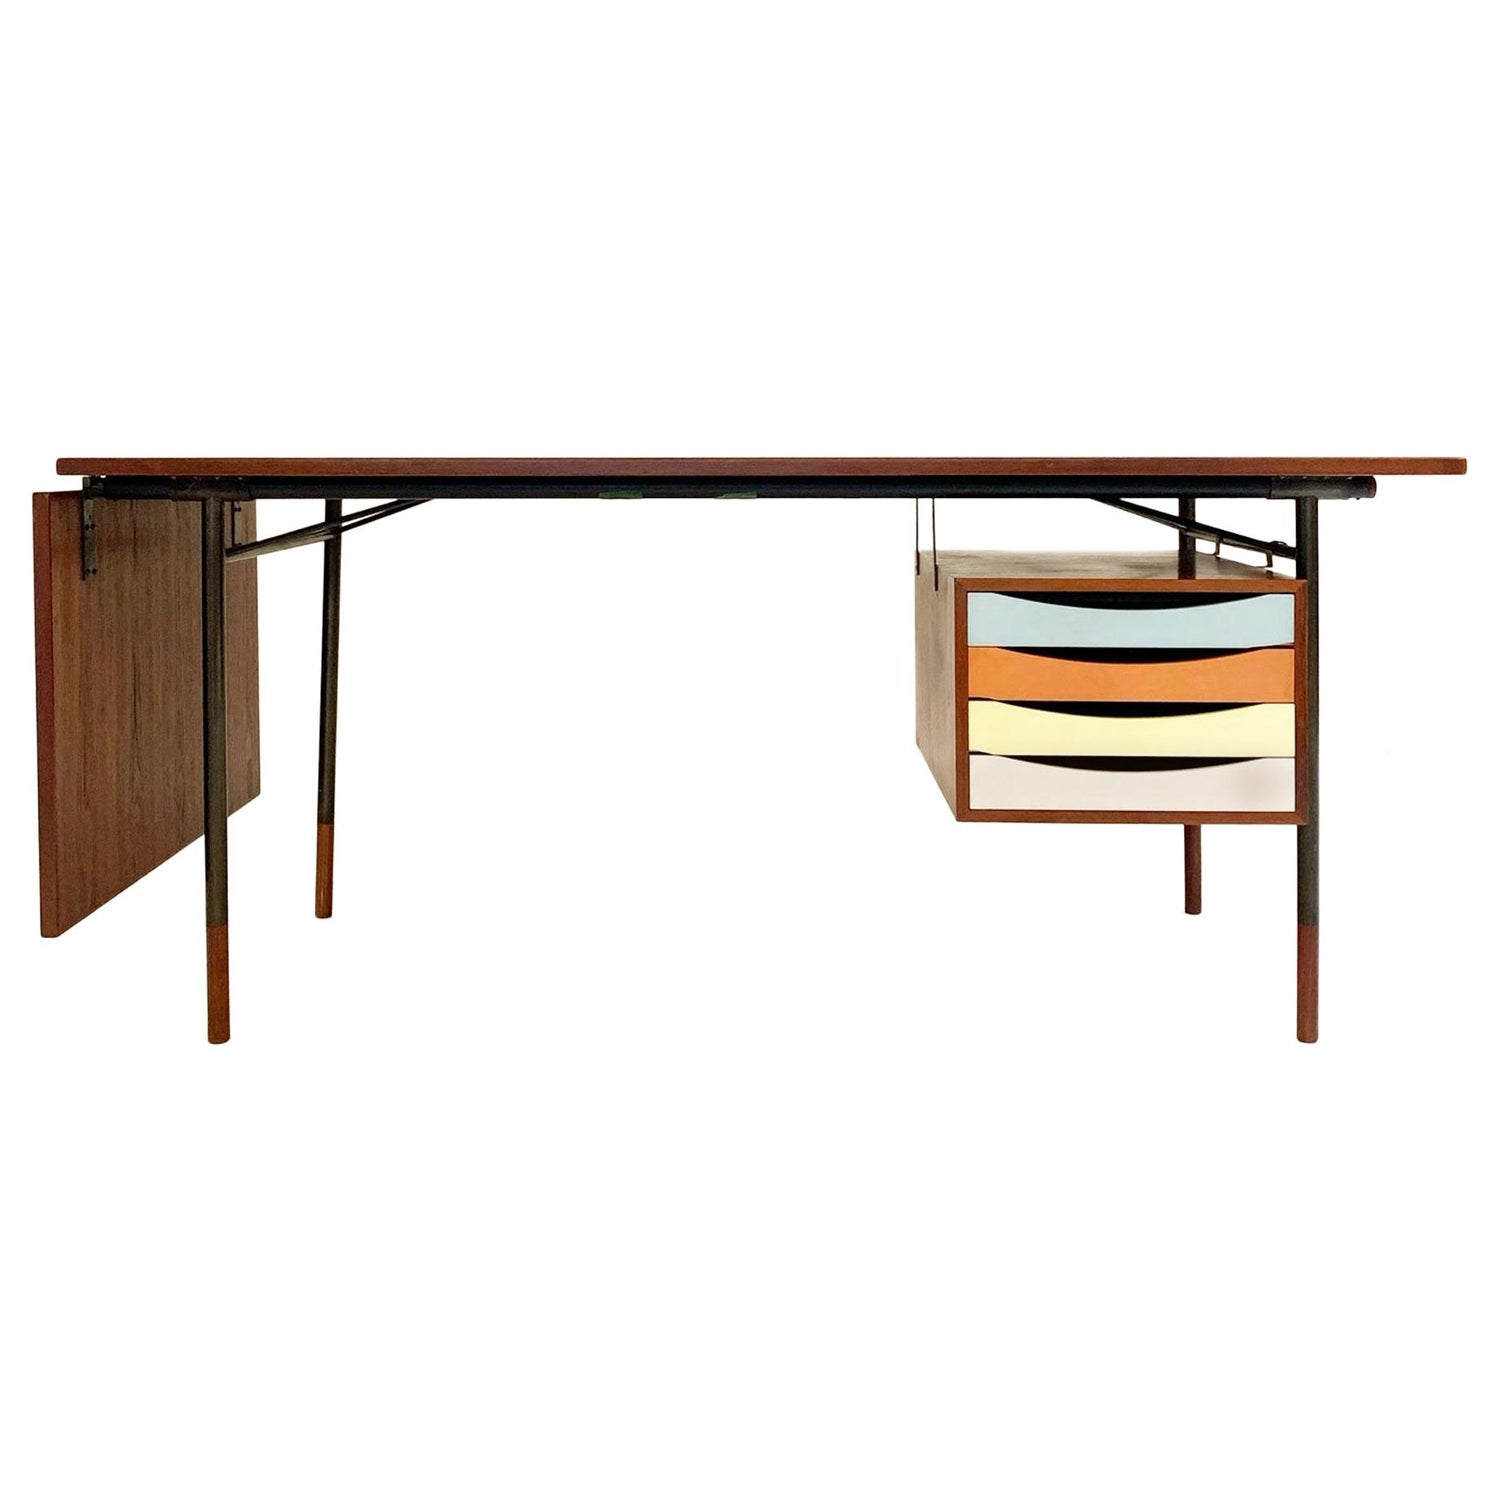 Finn Juhl Desks And Writing Tables 20 For Sale At 1stdibs